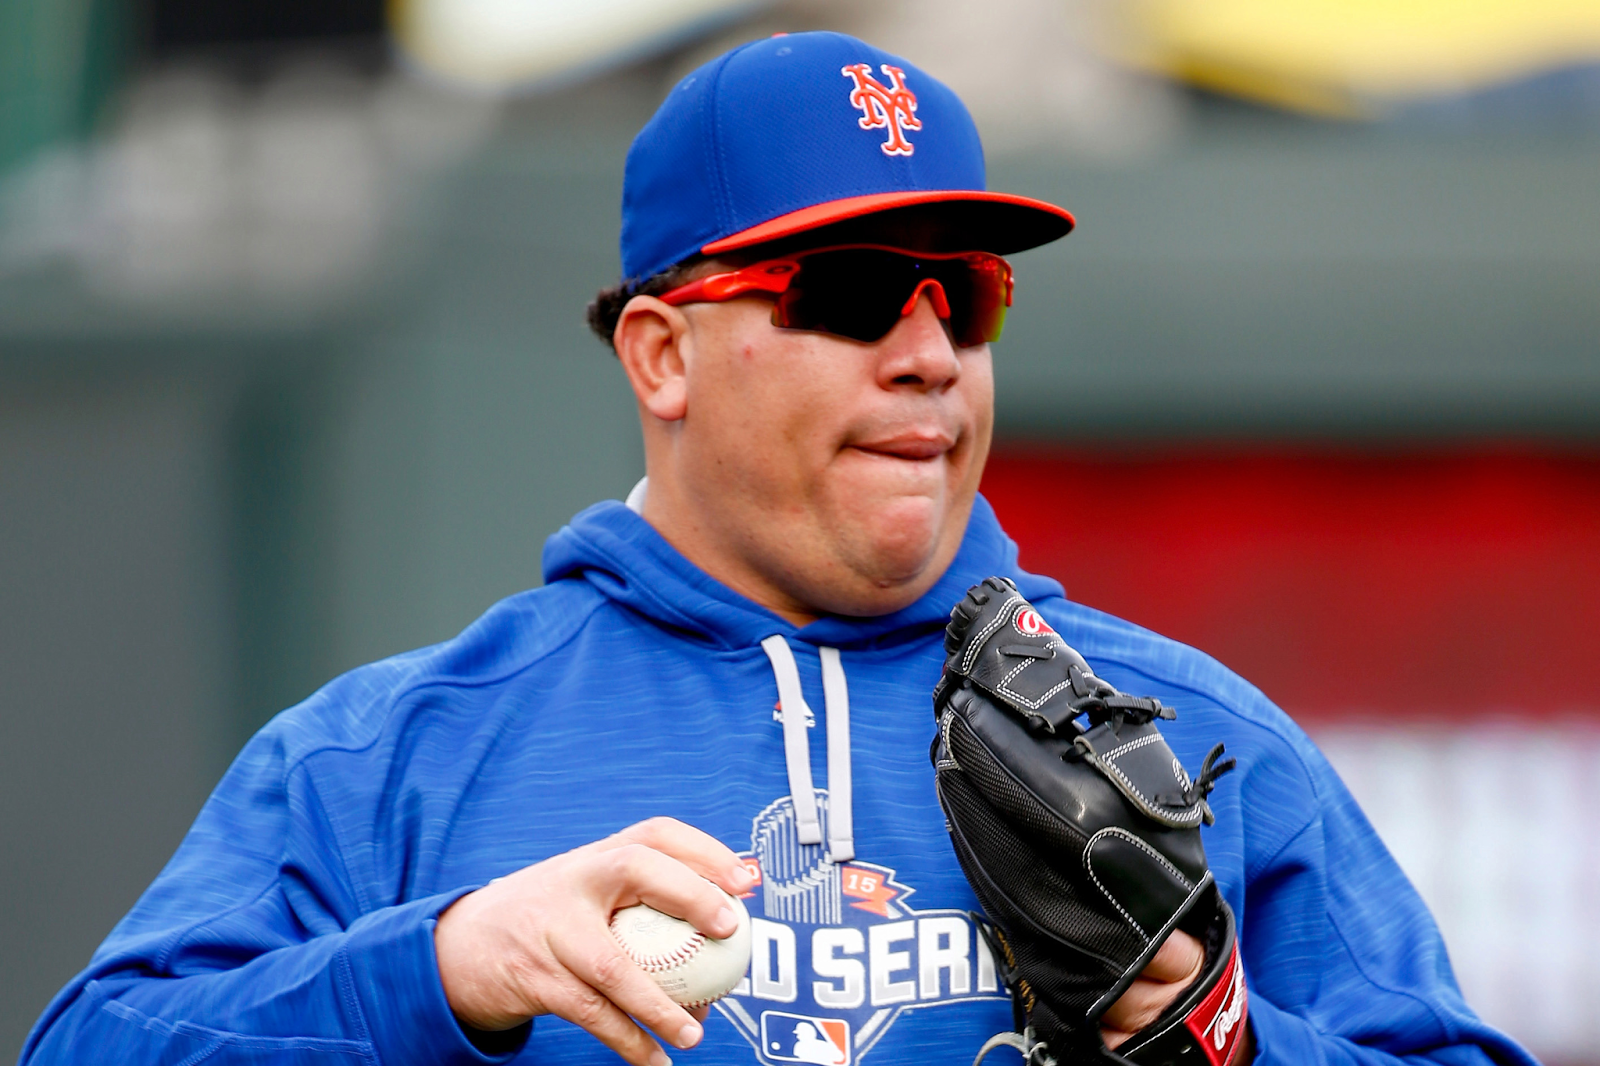 How Mets fan's 'crazy' April bet turned into a Bartolo Colon home